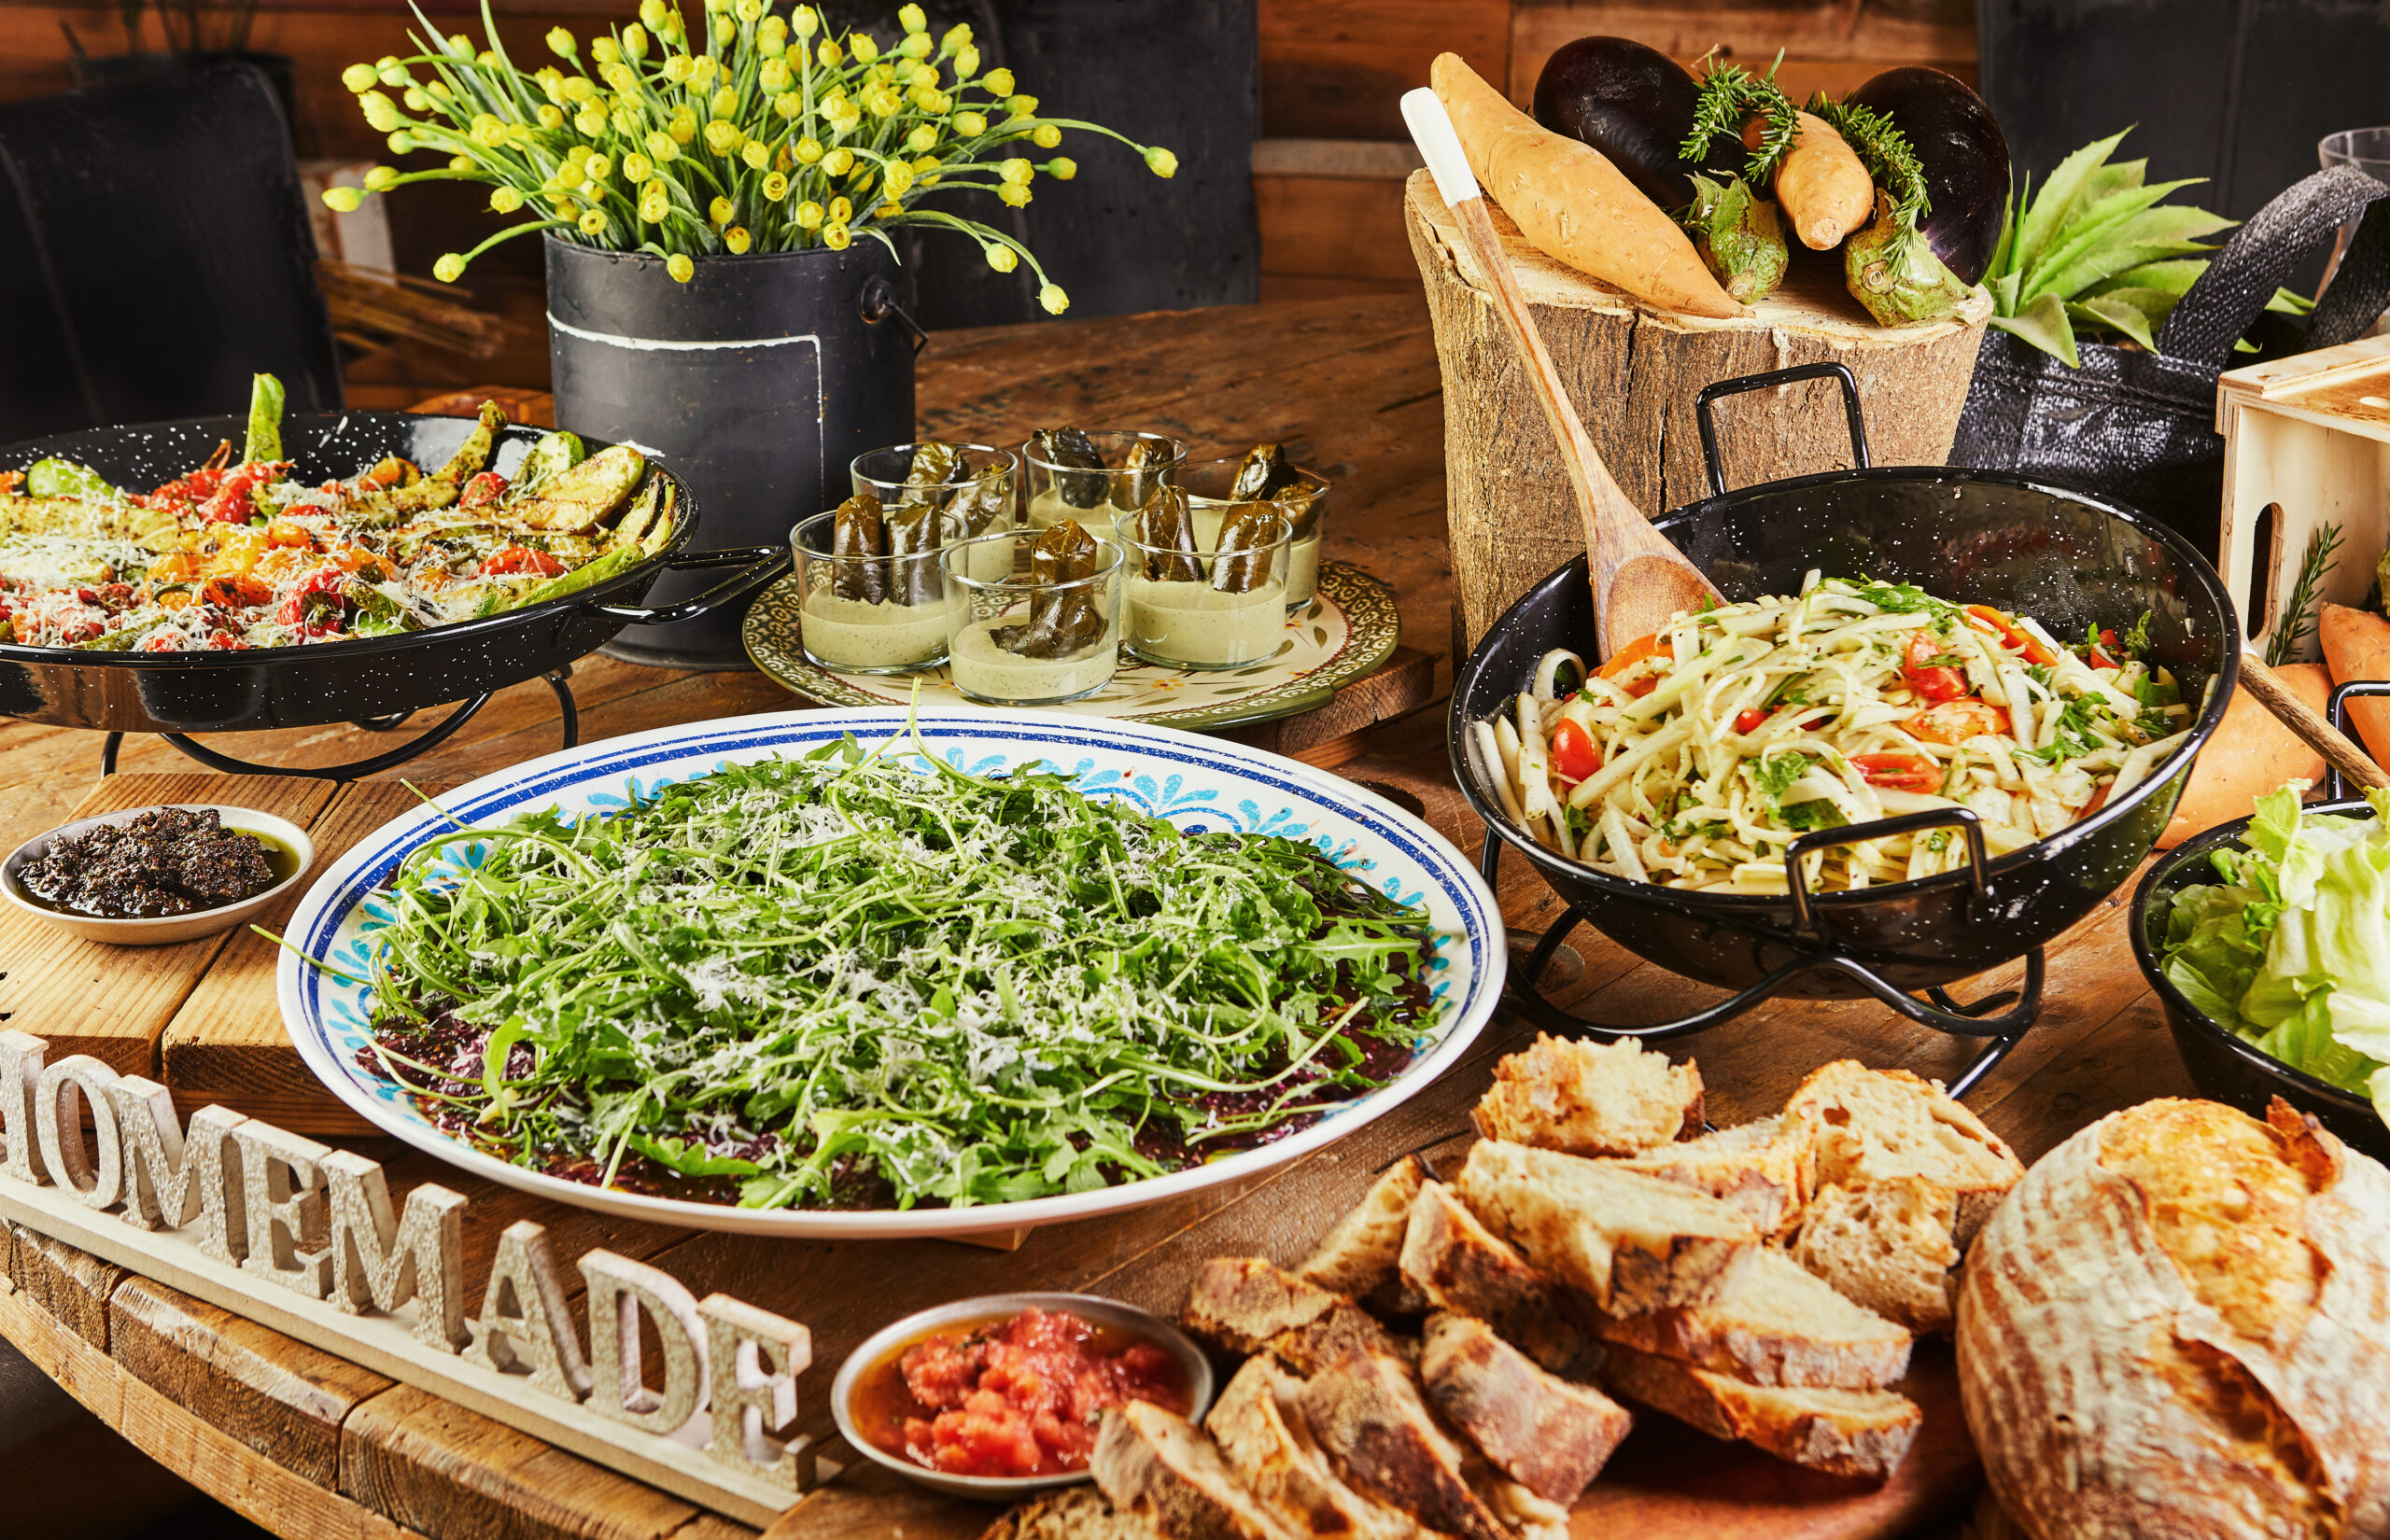 Buffet with a large selection of vegetable dishes and salads and Italian bread, healthy food